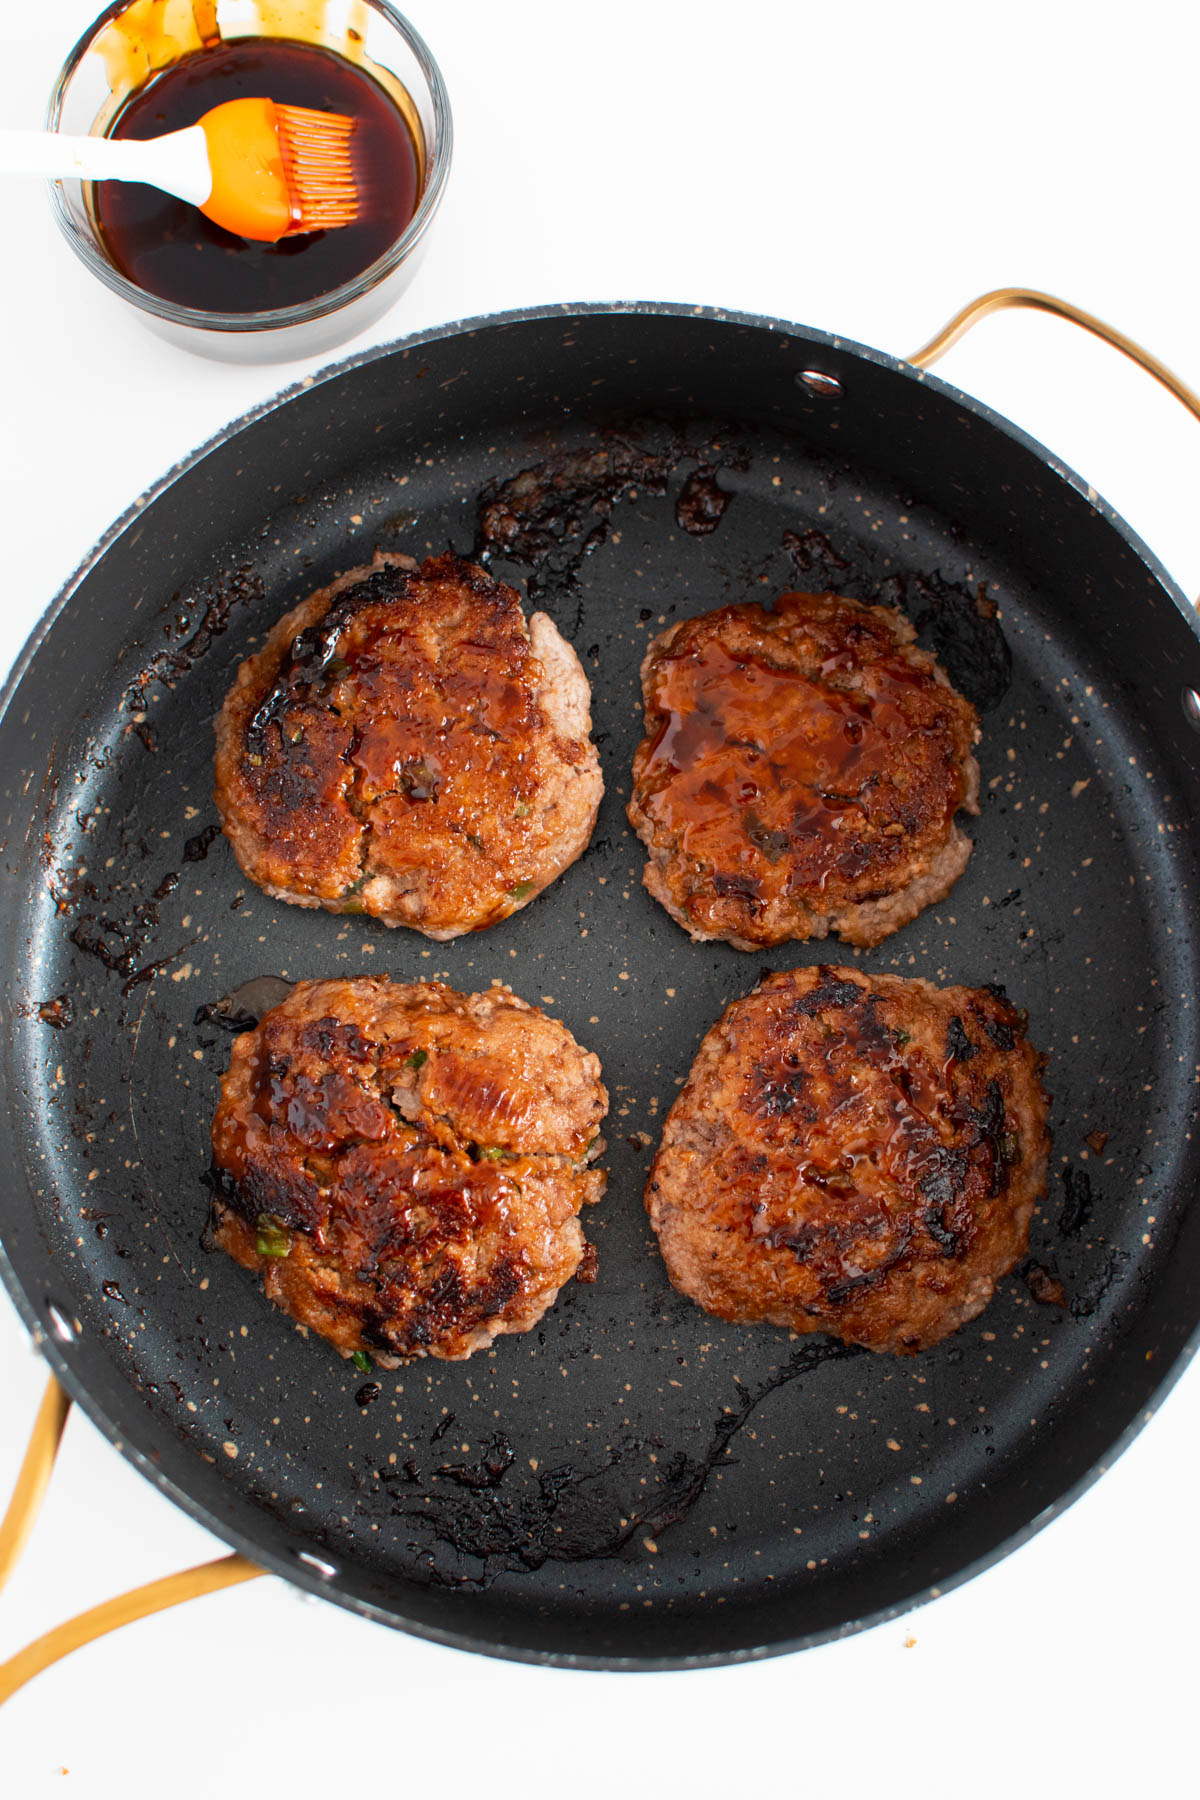 Four cooked turkey burgers basted with teriyaki sauce in black frying pan.